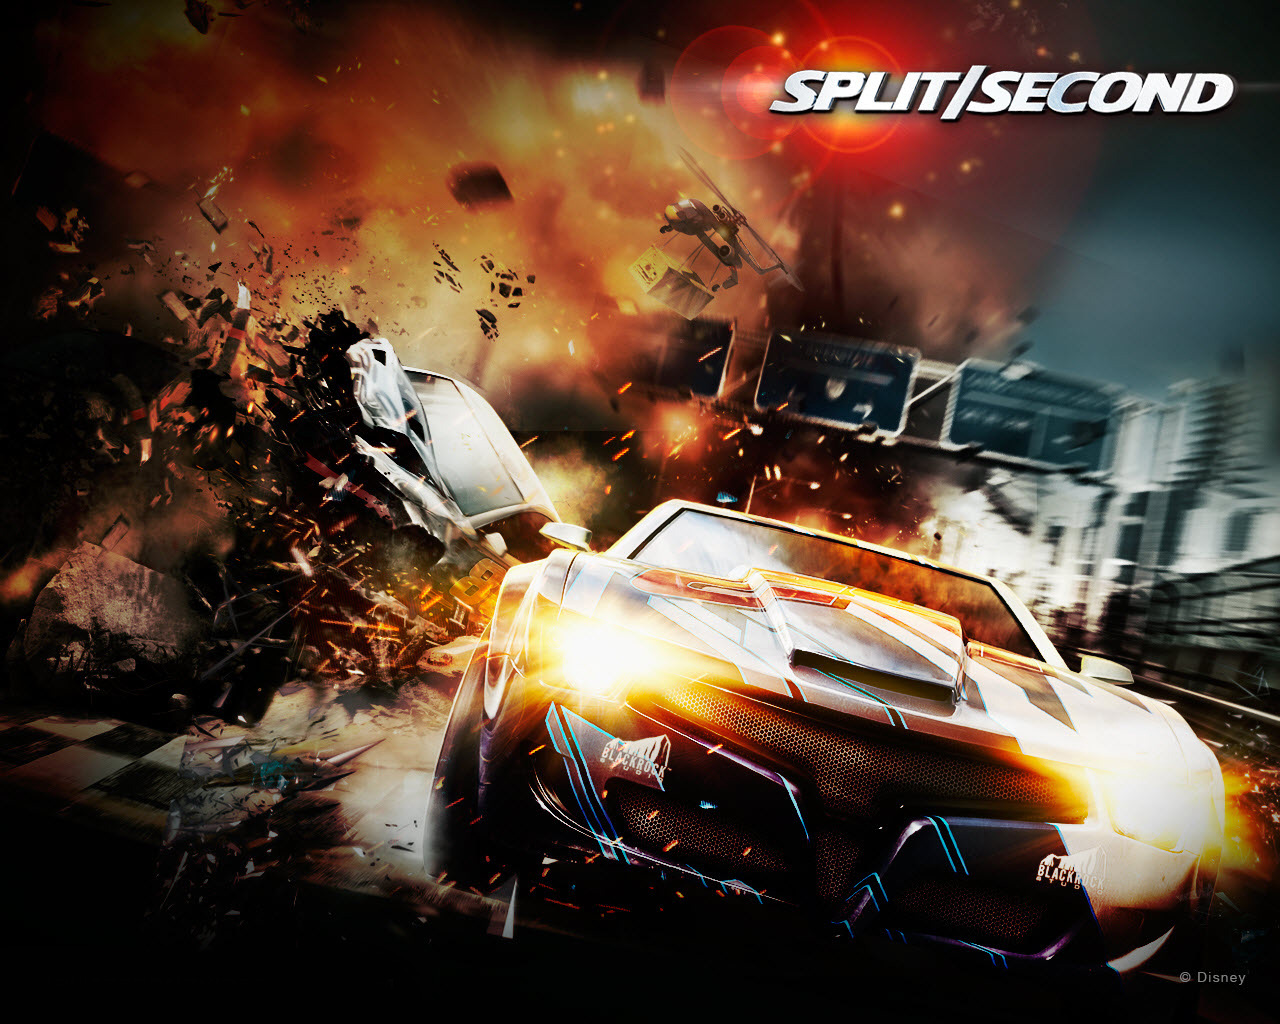 2010 Spilt Second Racing Game Wallpapers HD Wallpapers 1280x1024